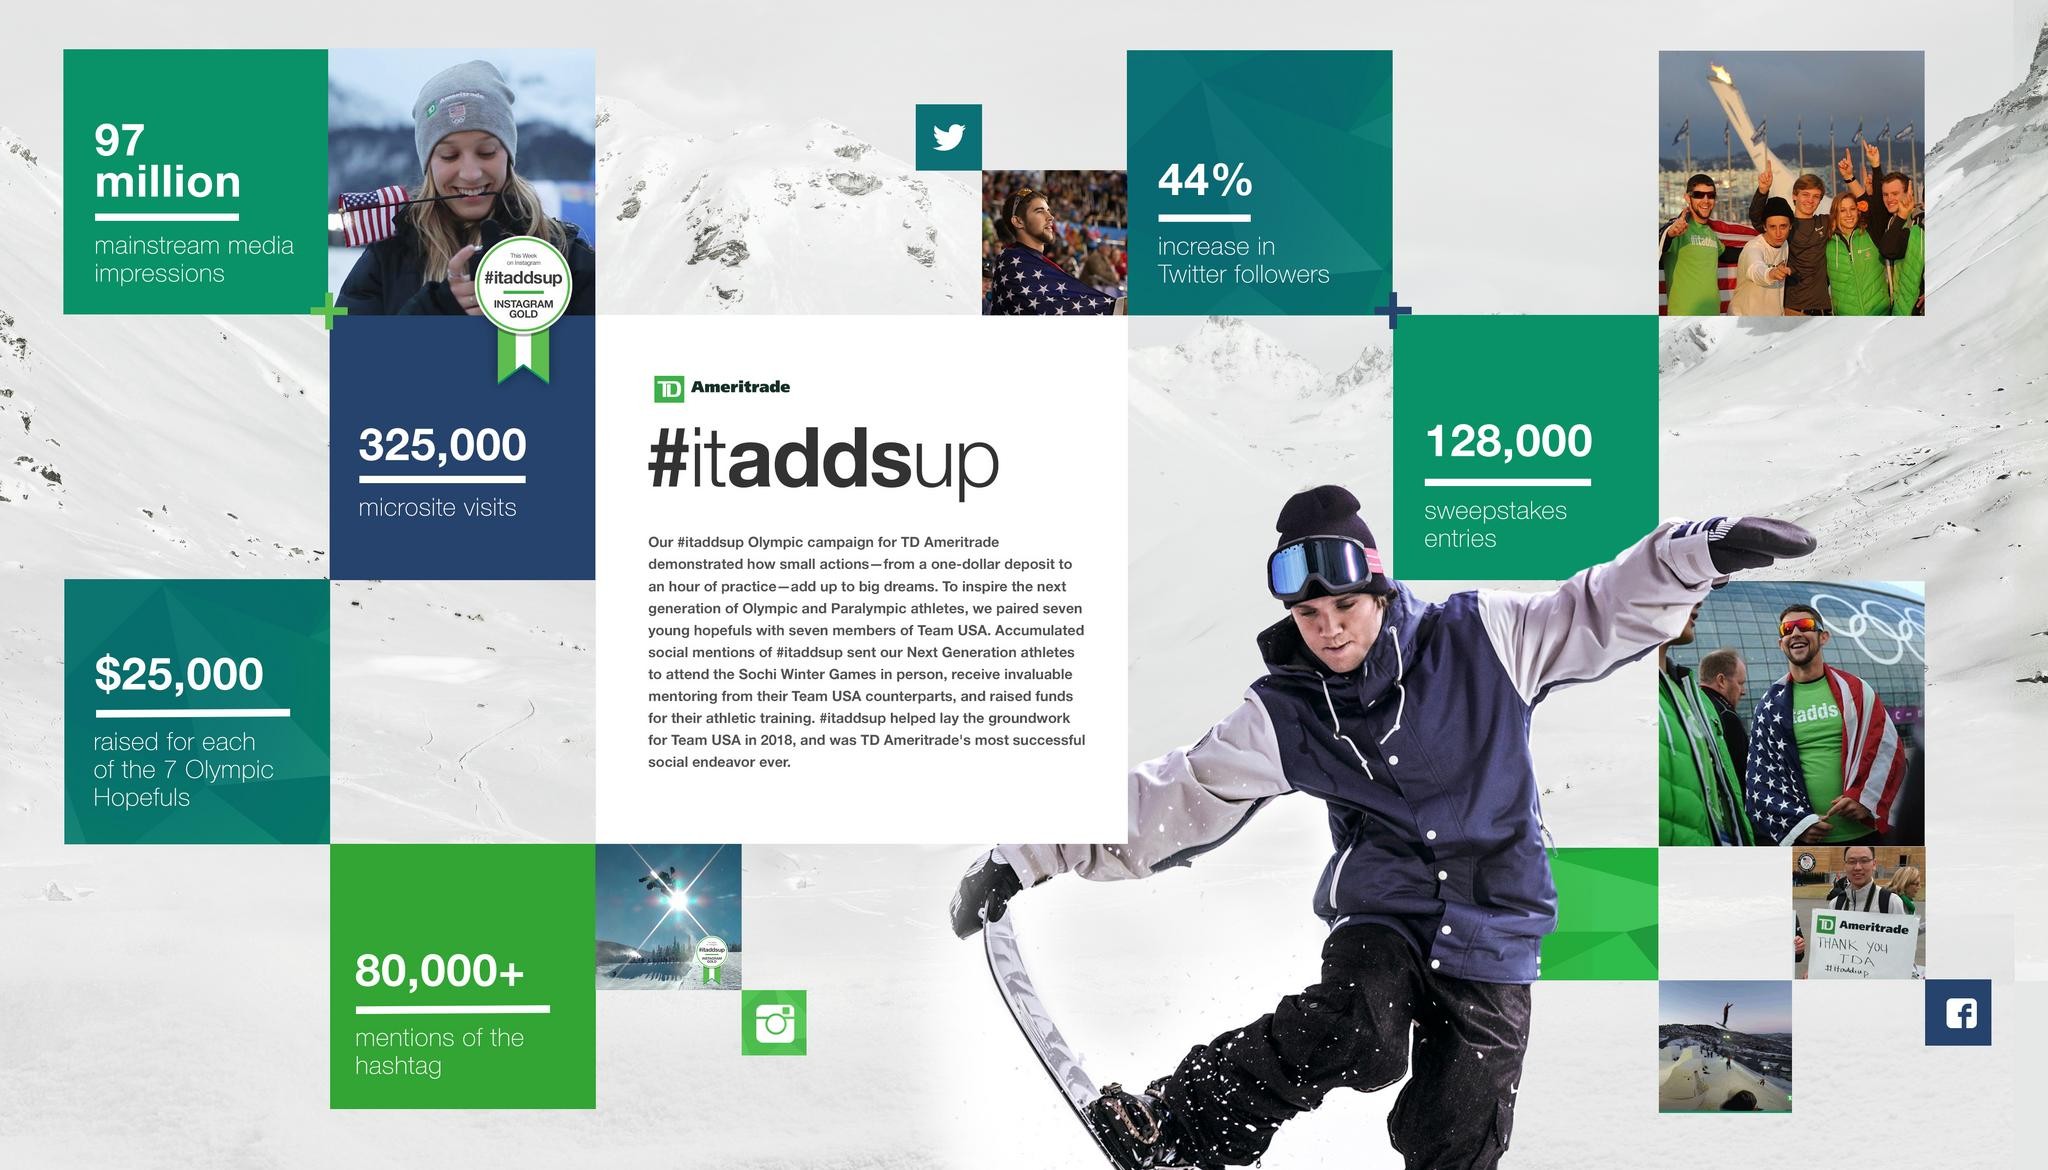 #ITADDSUP FOR TD AMERITRADE AT THE WINTER OLYMPICS CLIENT: TD AMERITRADE